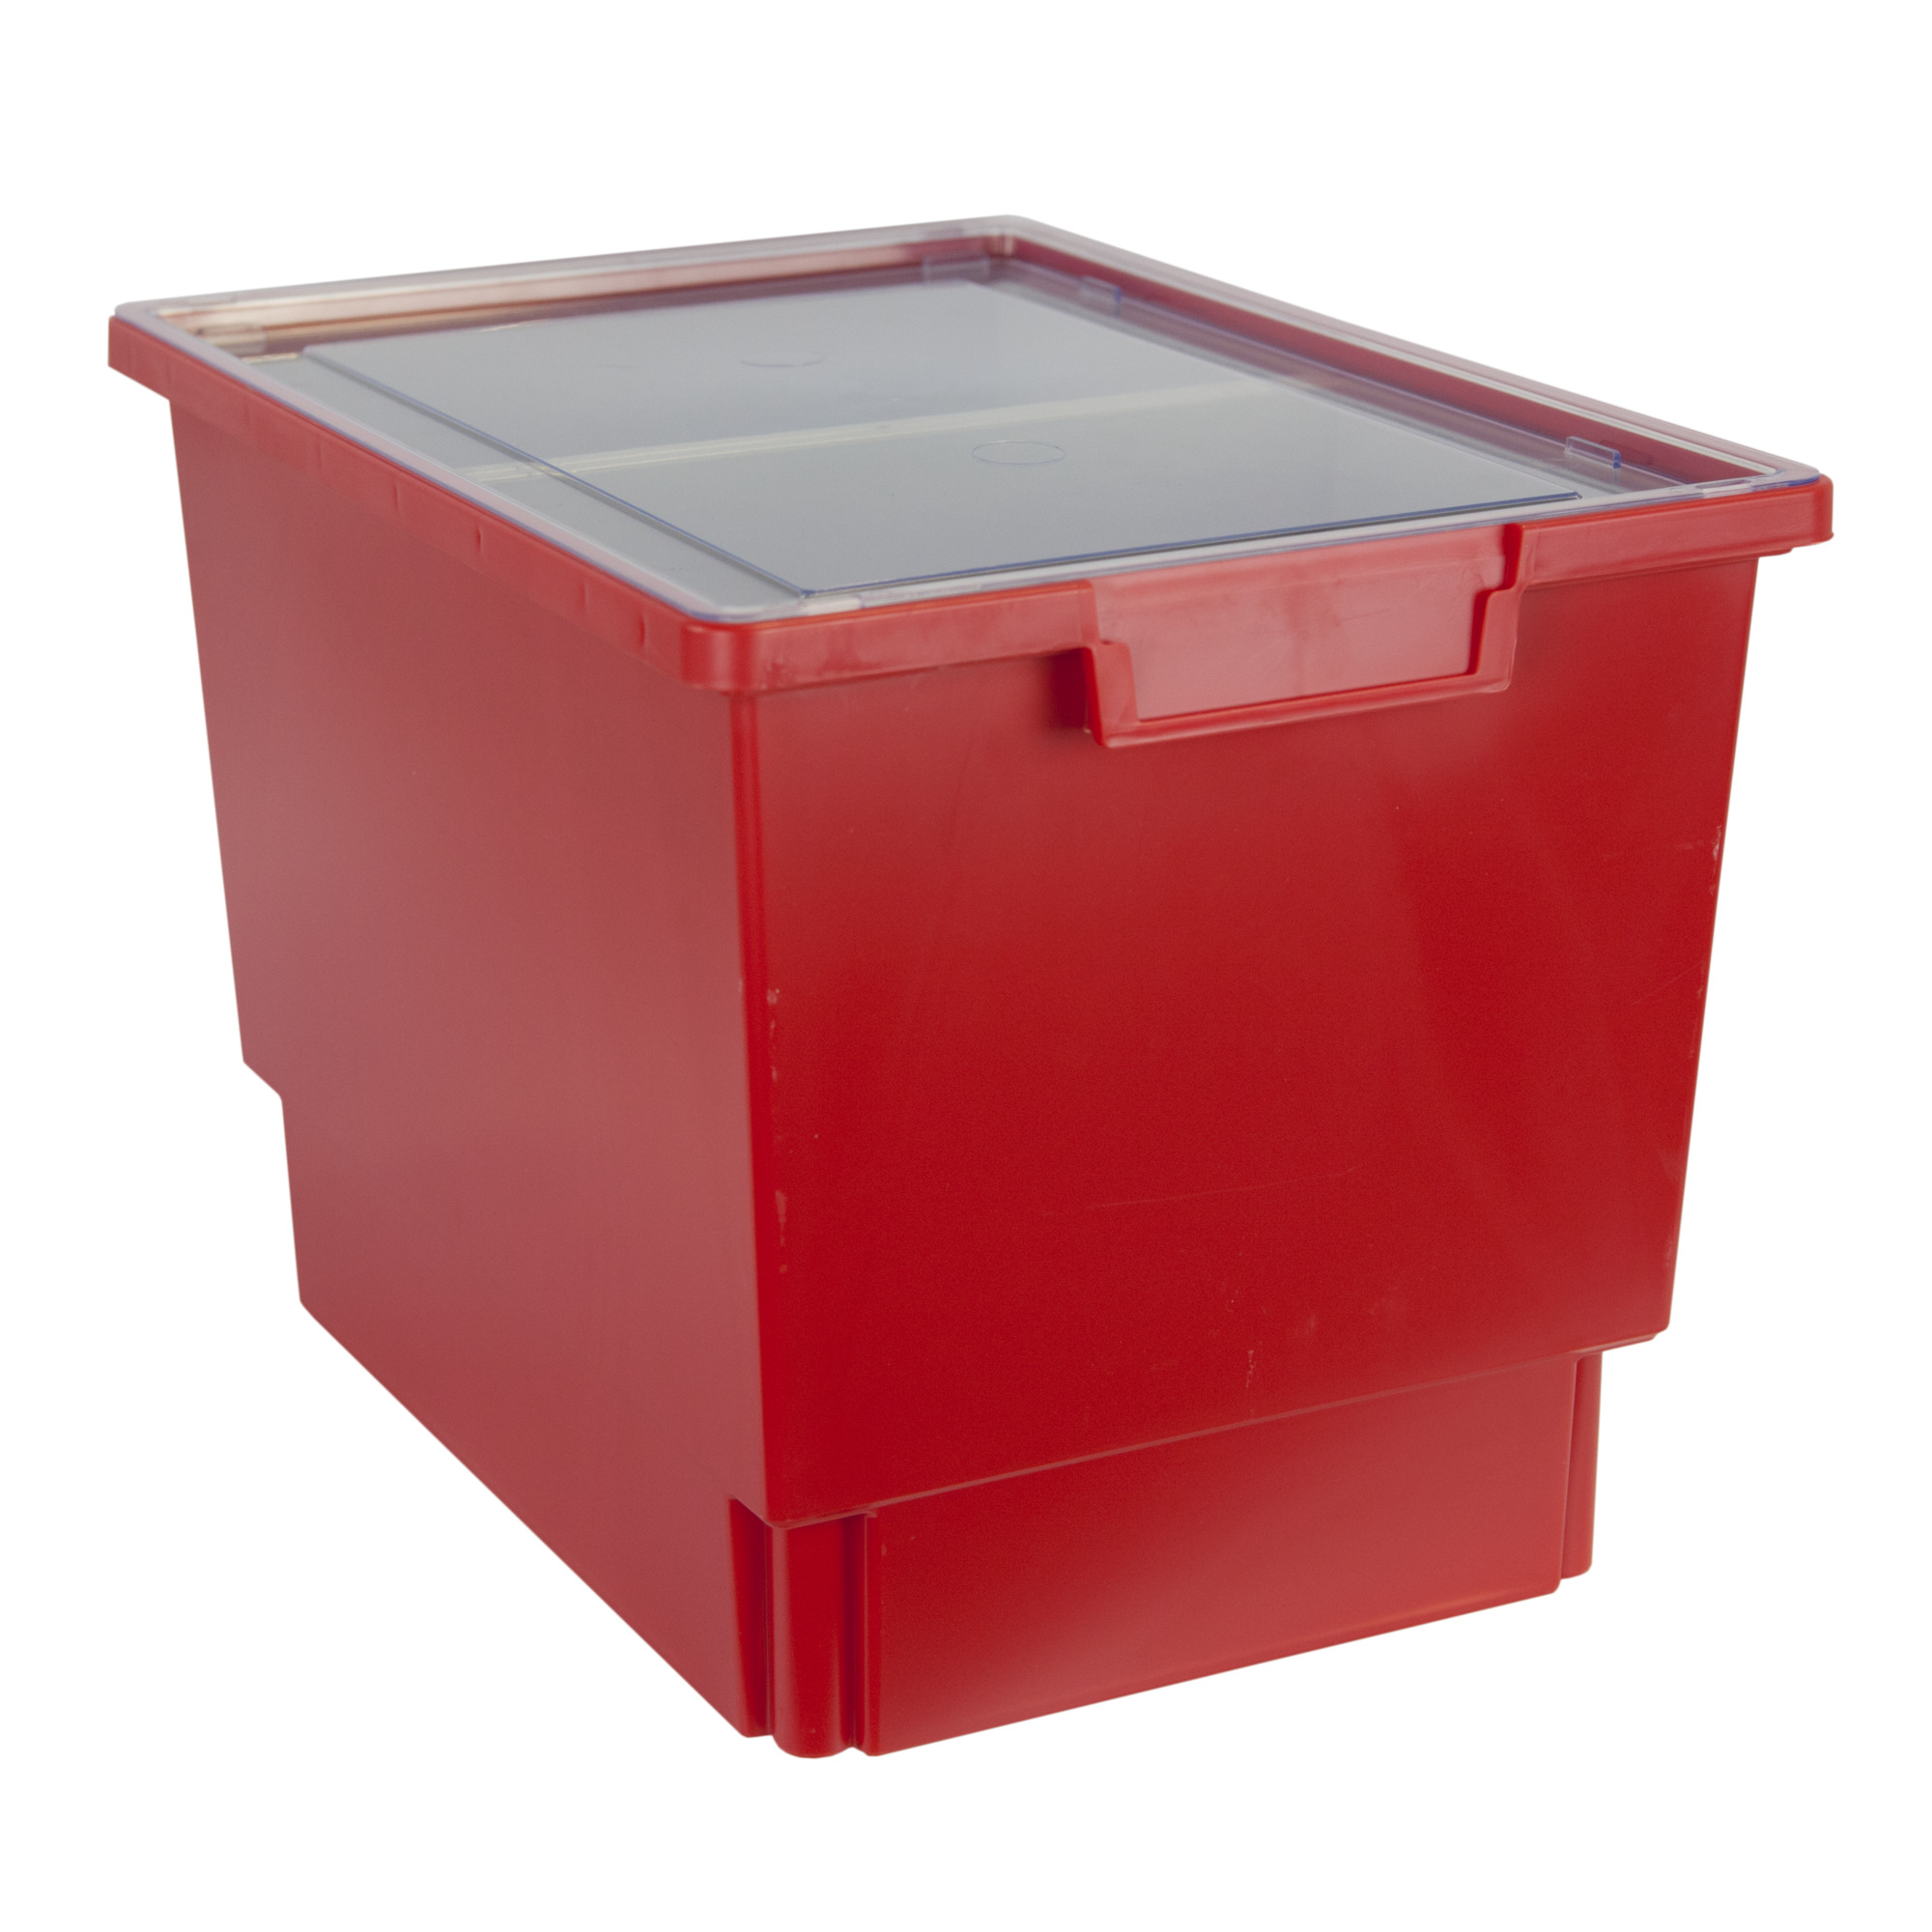 Certwood StorWerks, Slim Line 12Inch Tray Kit (2 x Divisions) Red, Included (qty.) 1, Material Plastic, Height 12 in, Model CE1954PR-NK0404-1